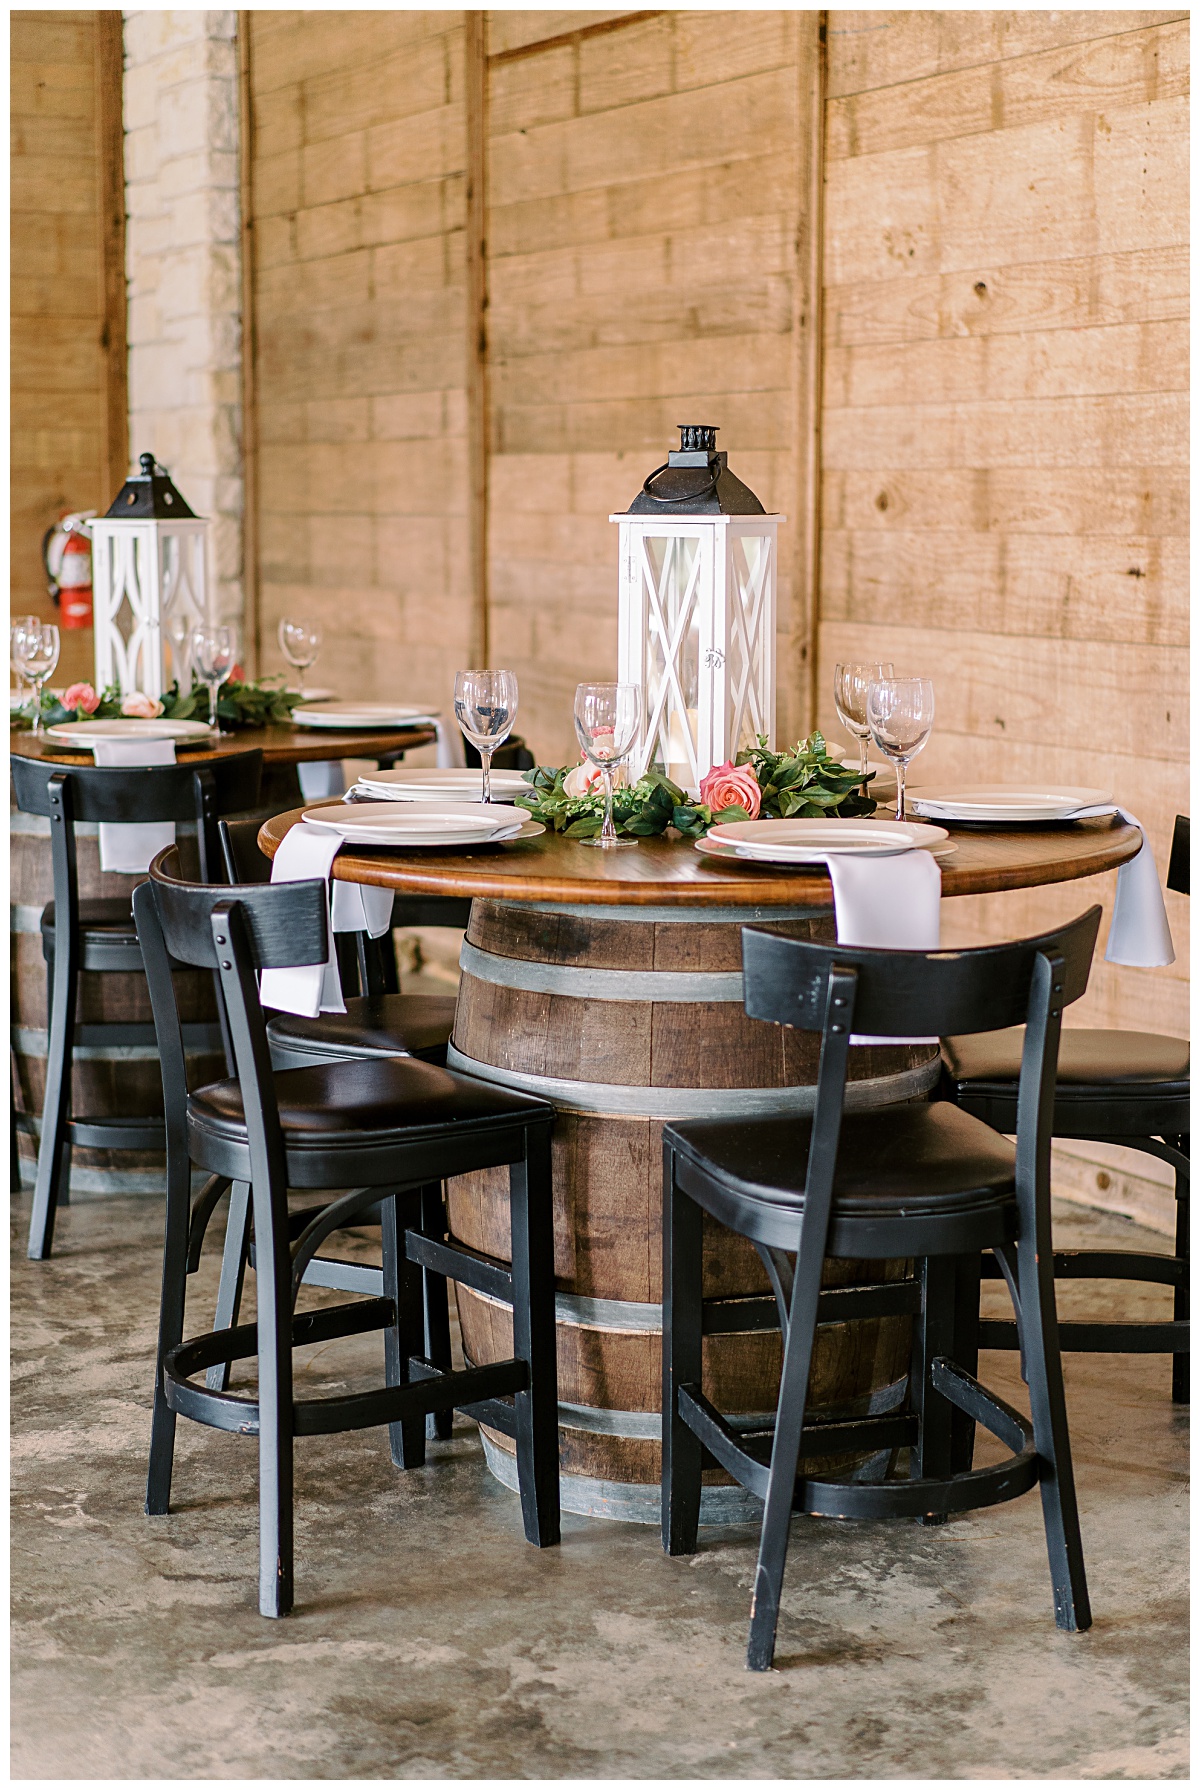 Winery style wedding | Wild and Lush design by Emery's Buffalo Creek planning team 